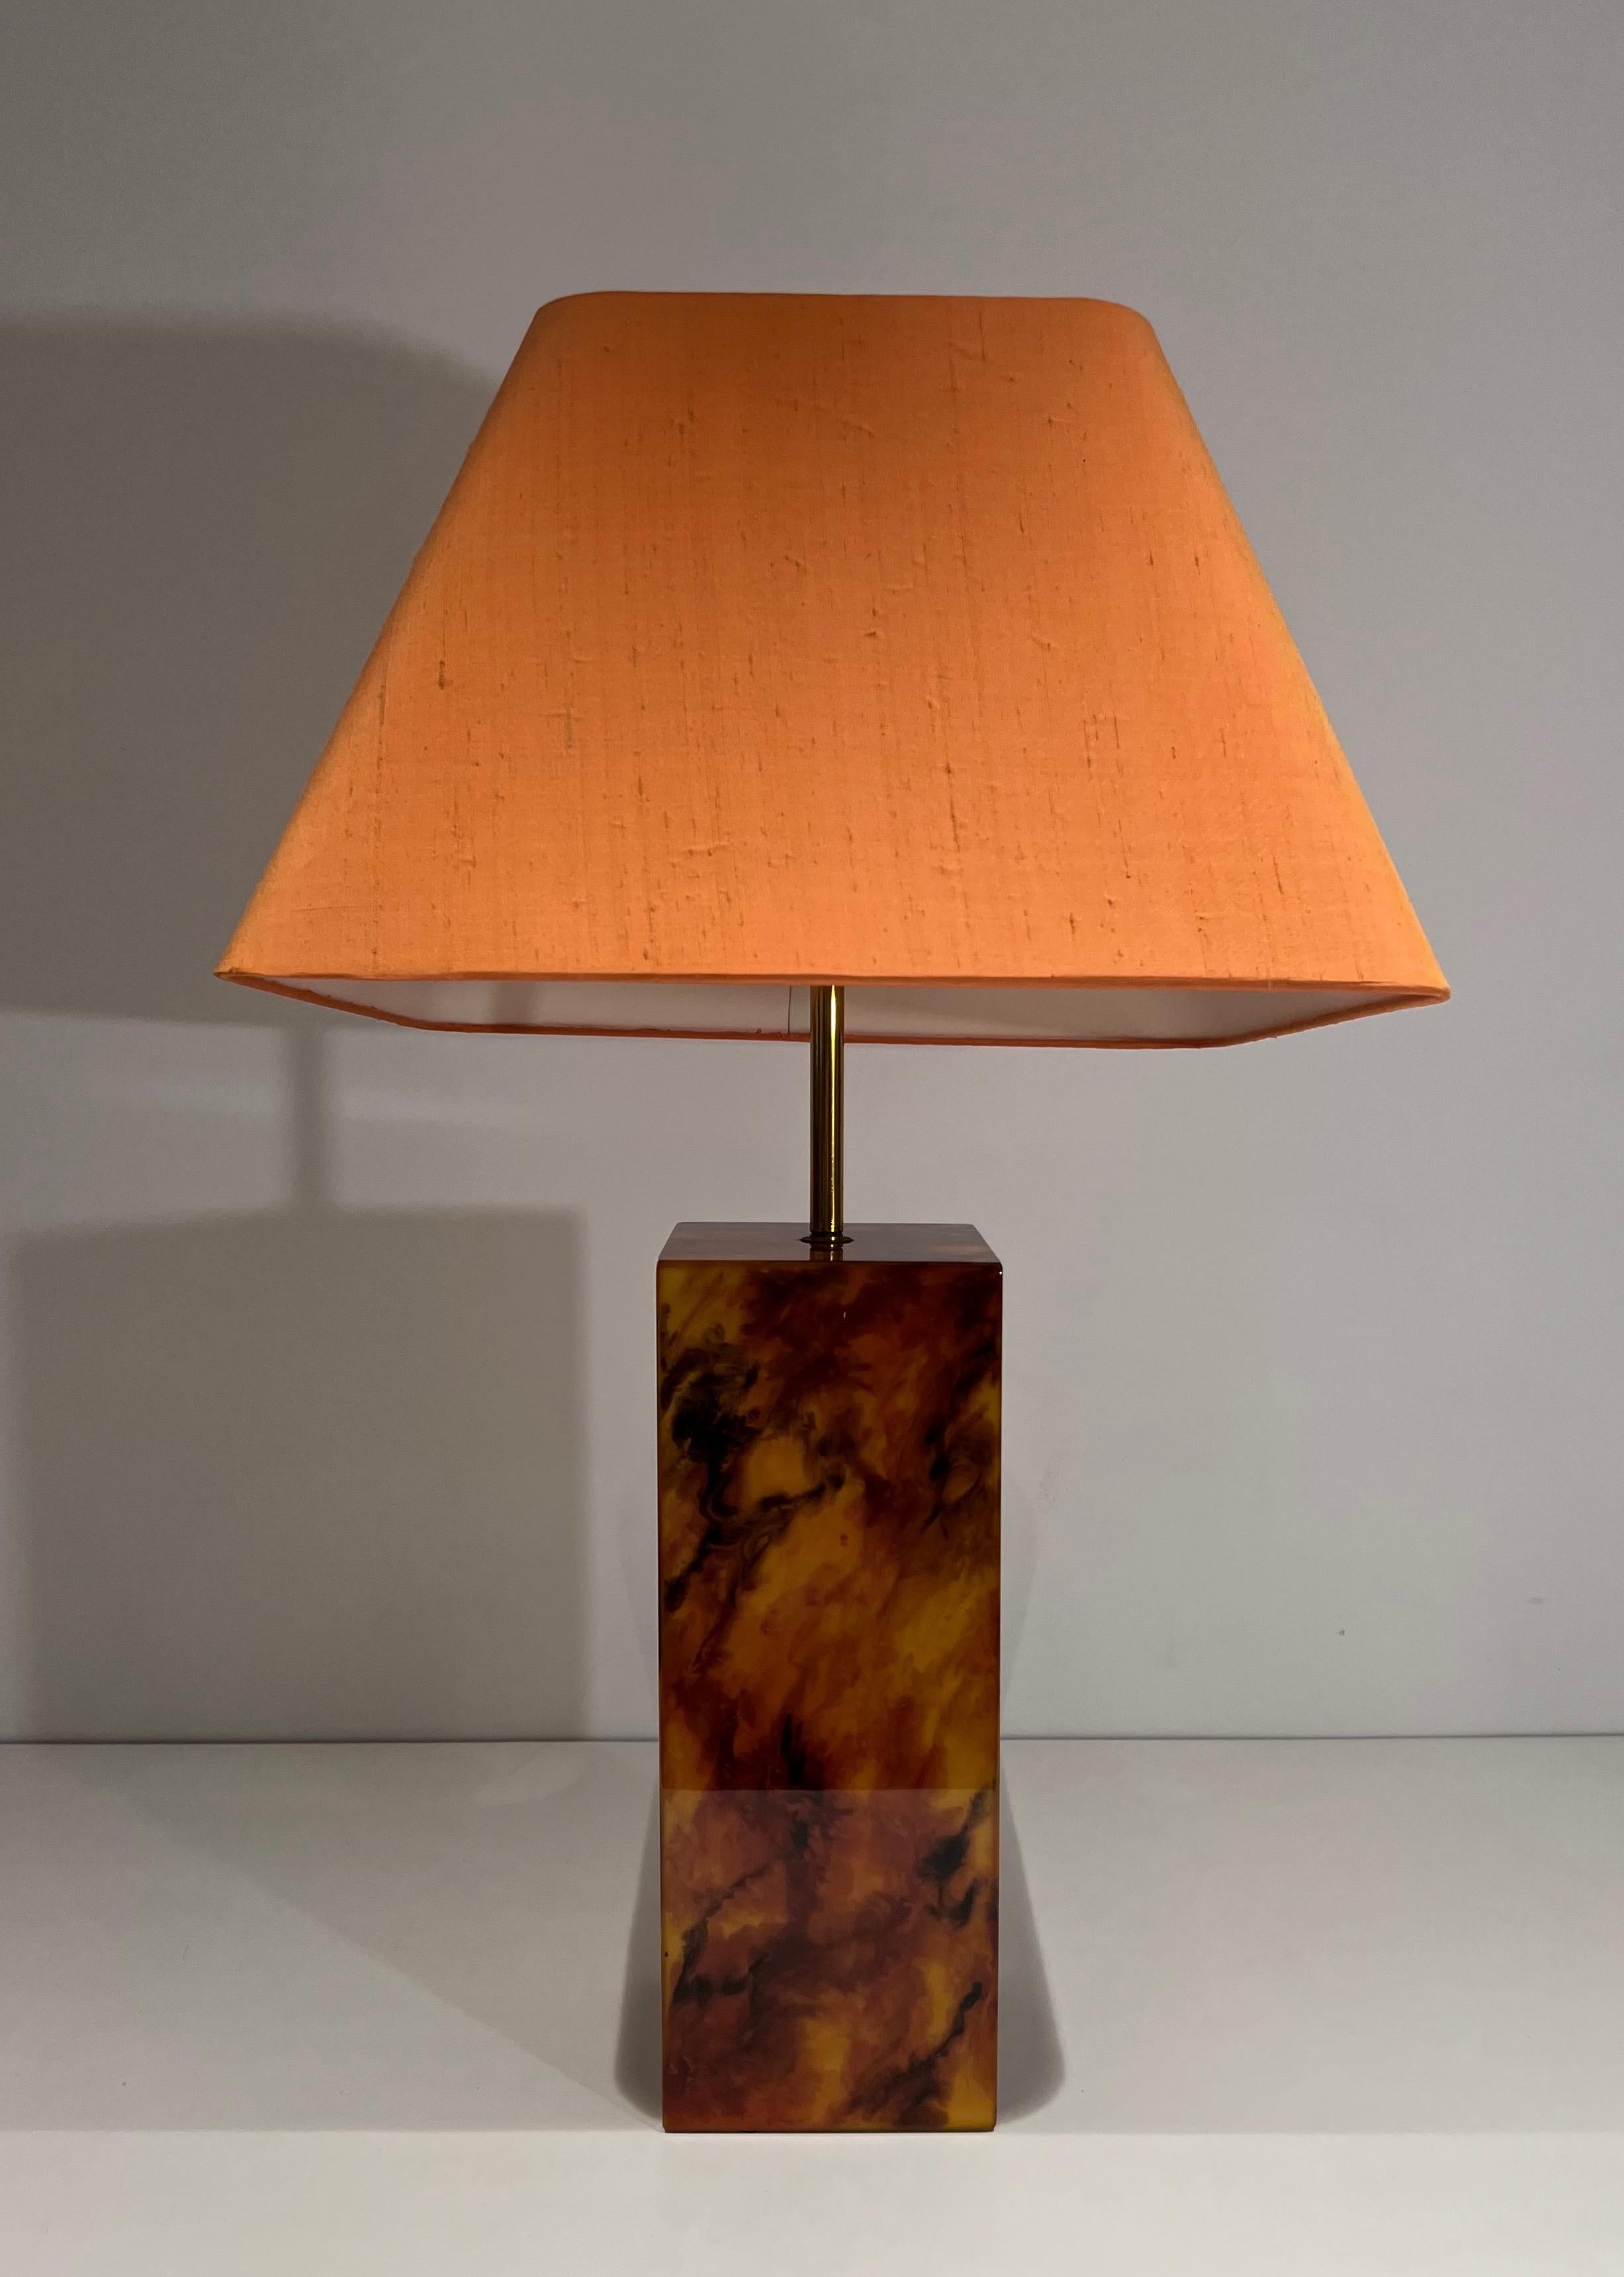 Pair of Lucite Lamps Imitating Tortoise Shell. French work. Circa 1970 For Sale 9